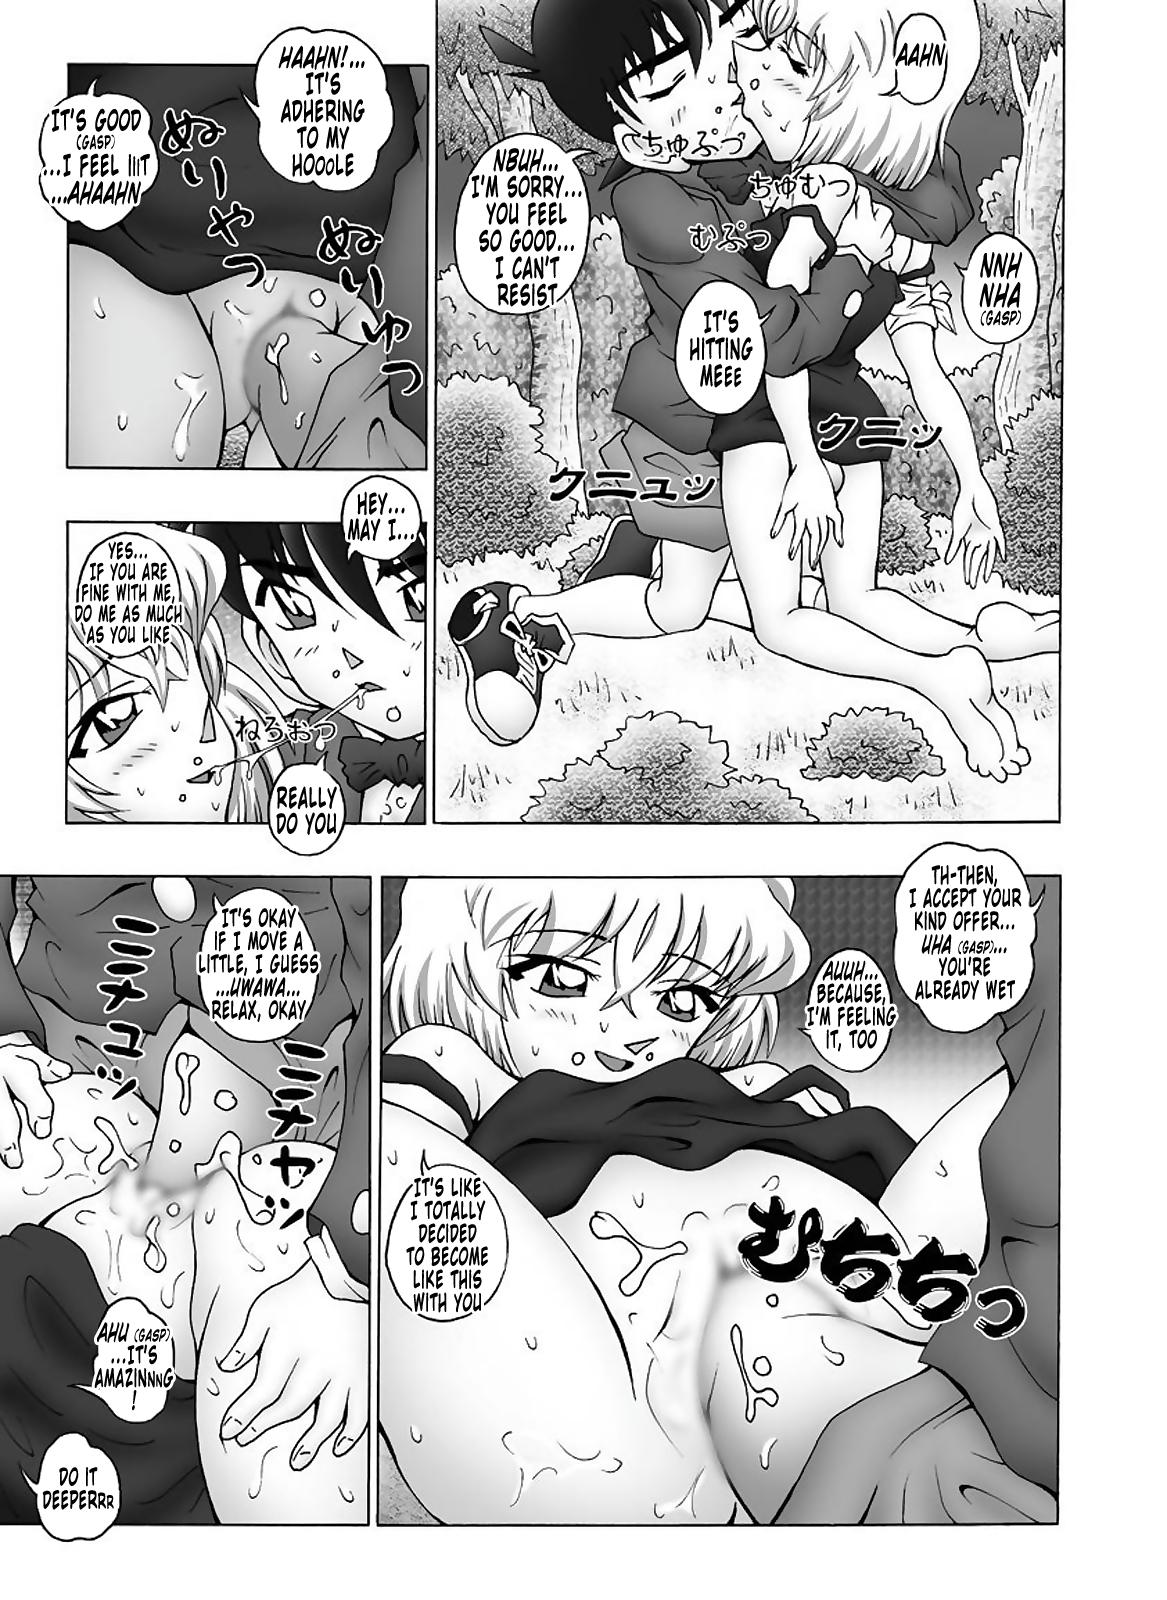 Cheating Wife Bumbling Detective Conan - File 12: The Case of Back To The Future - Detective conan Plug - Page 12